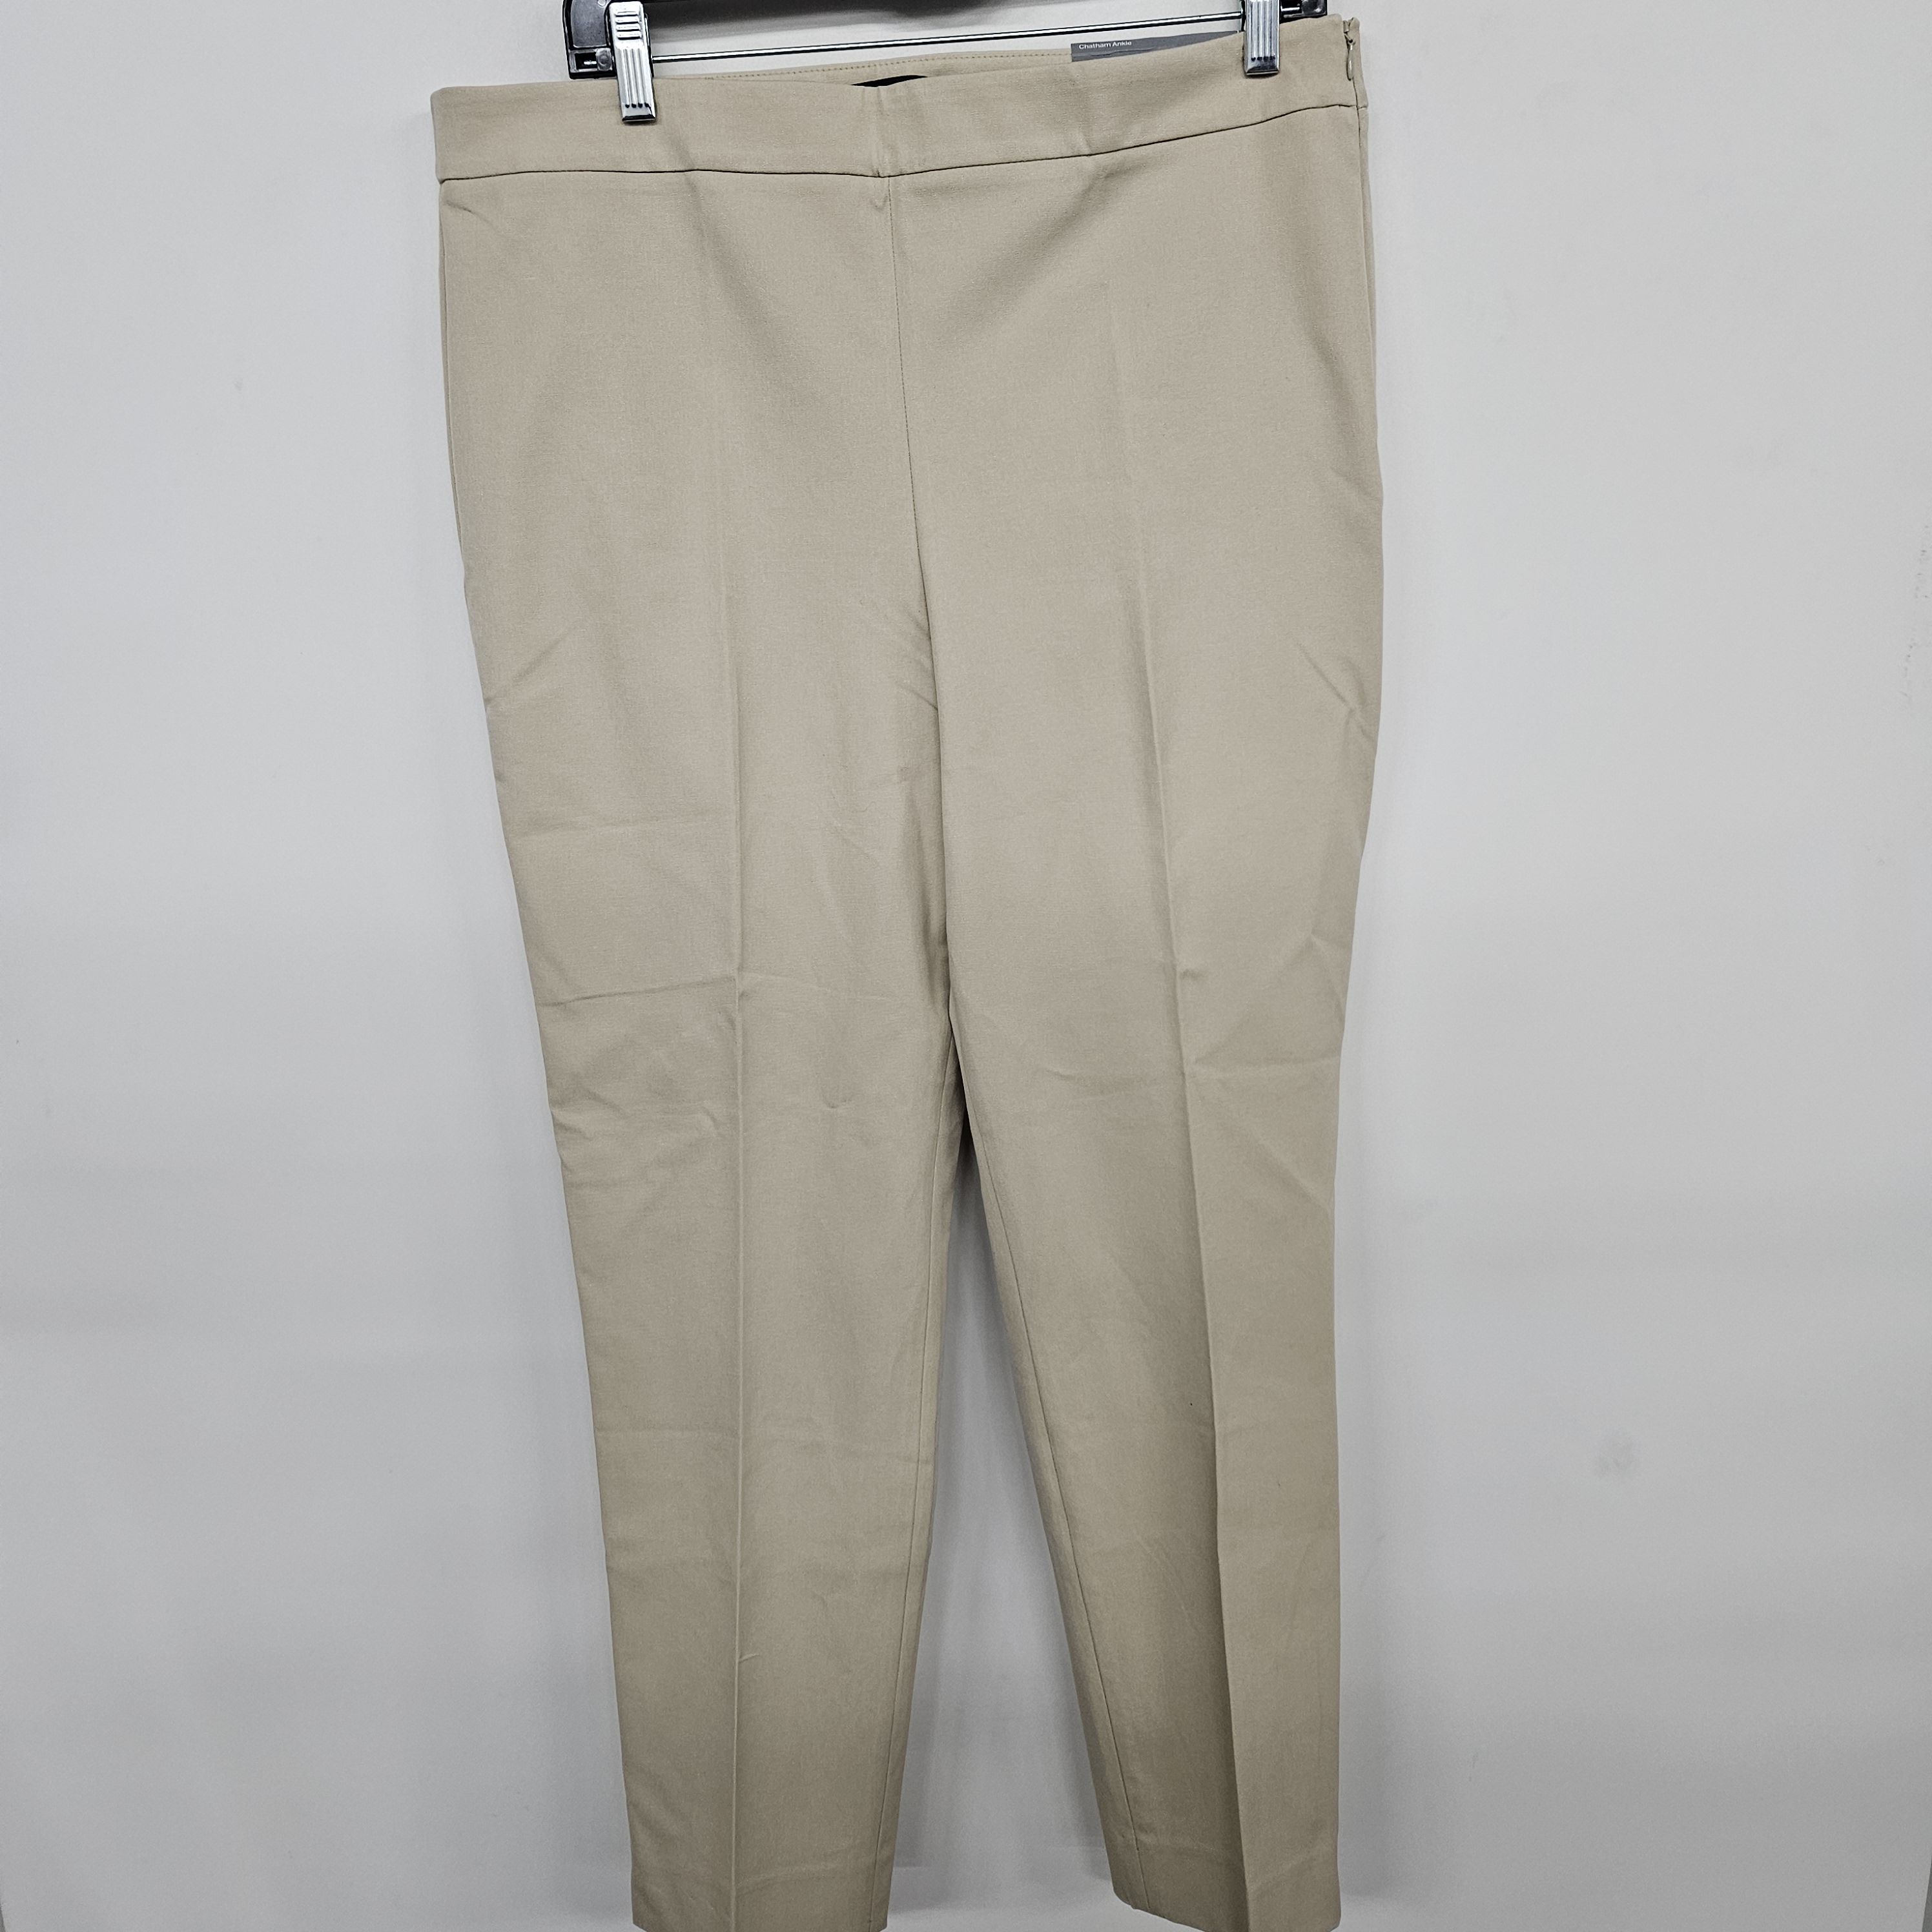 Buy the Talbots Chatham Ankle Pants